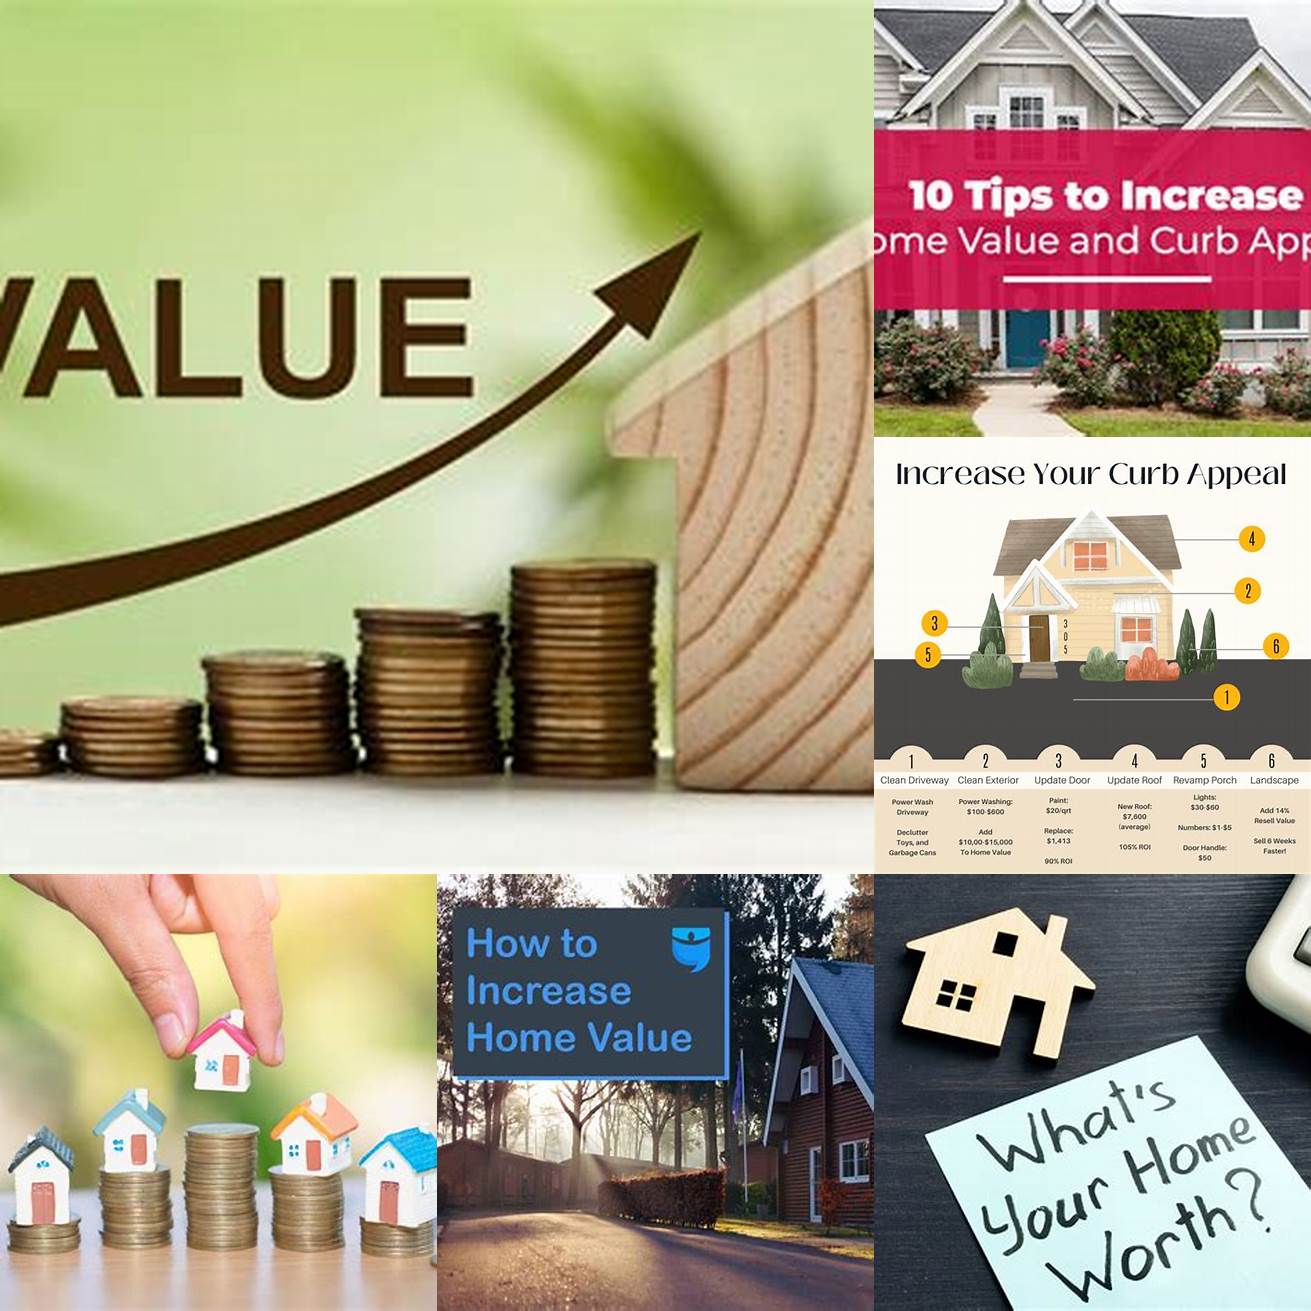 Increase in home value and appeal to potential buyers